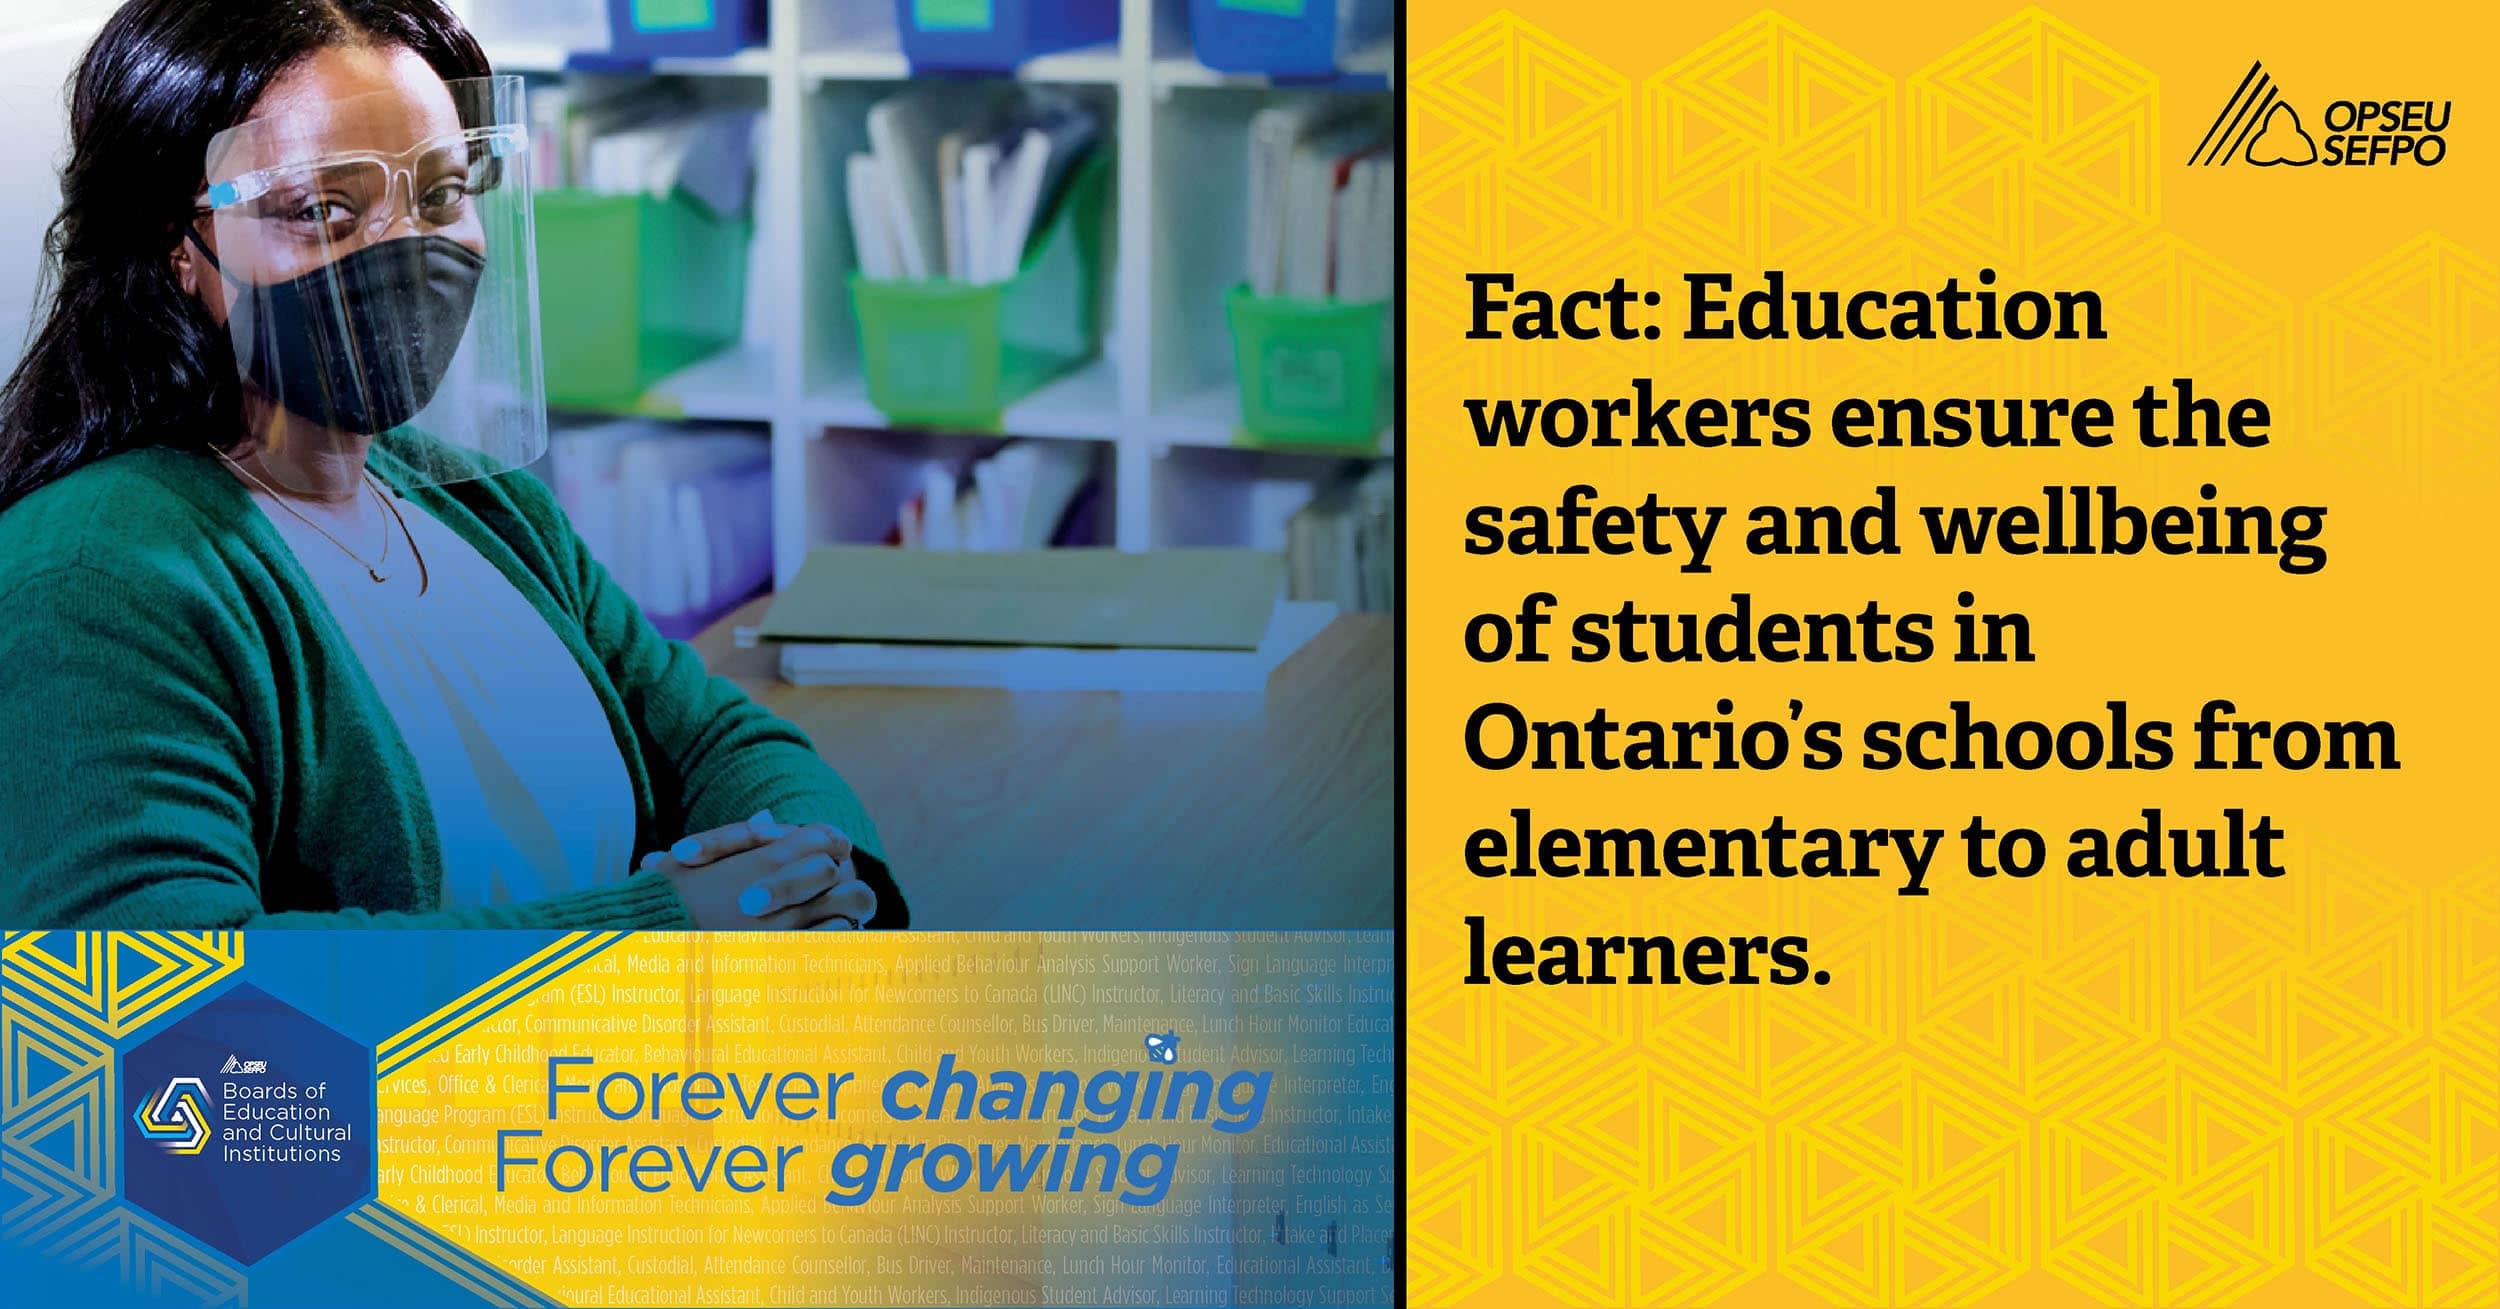 Education workers ensure the safety and wellbeing of students